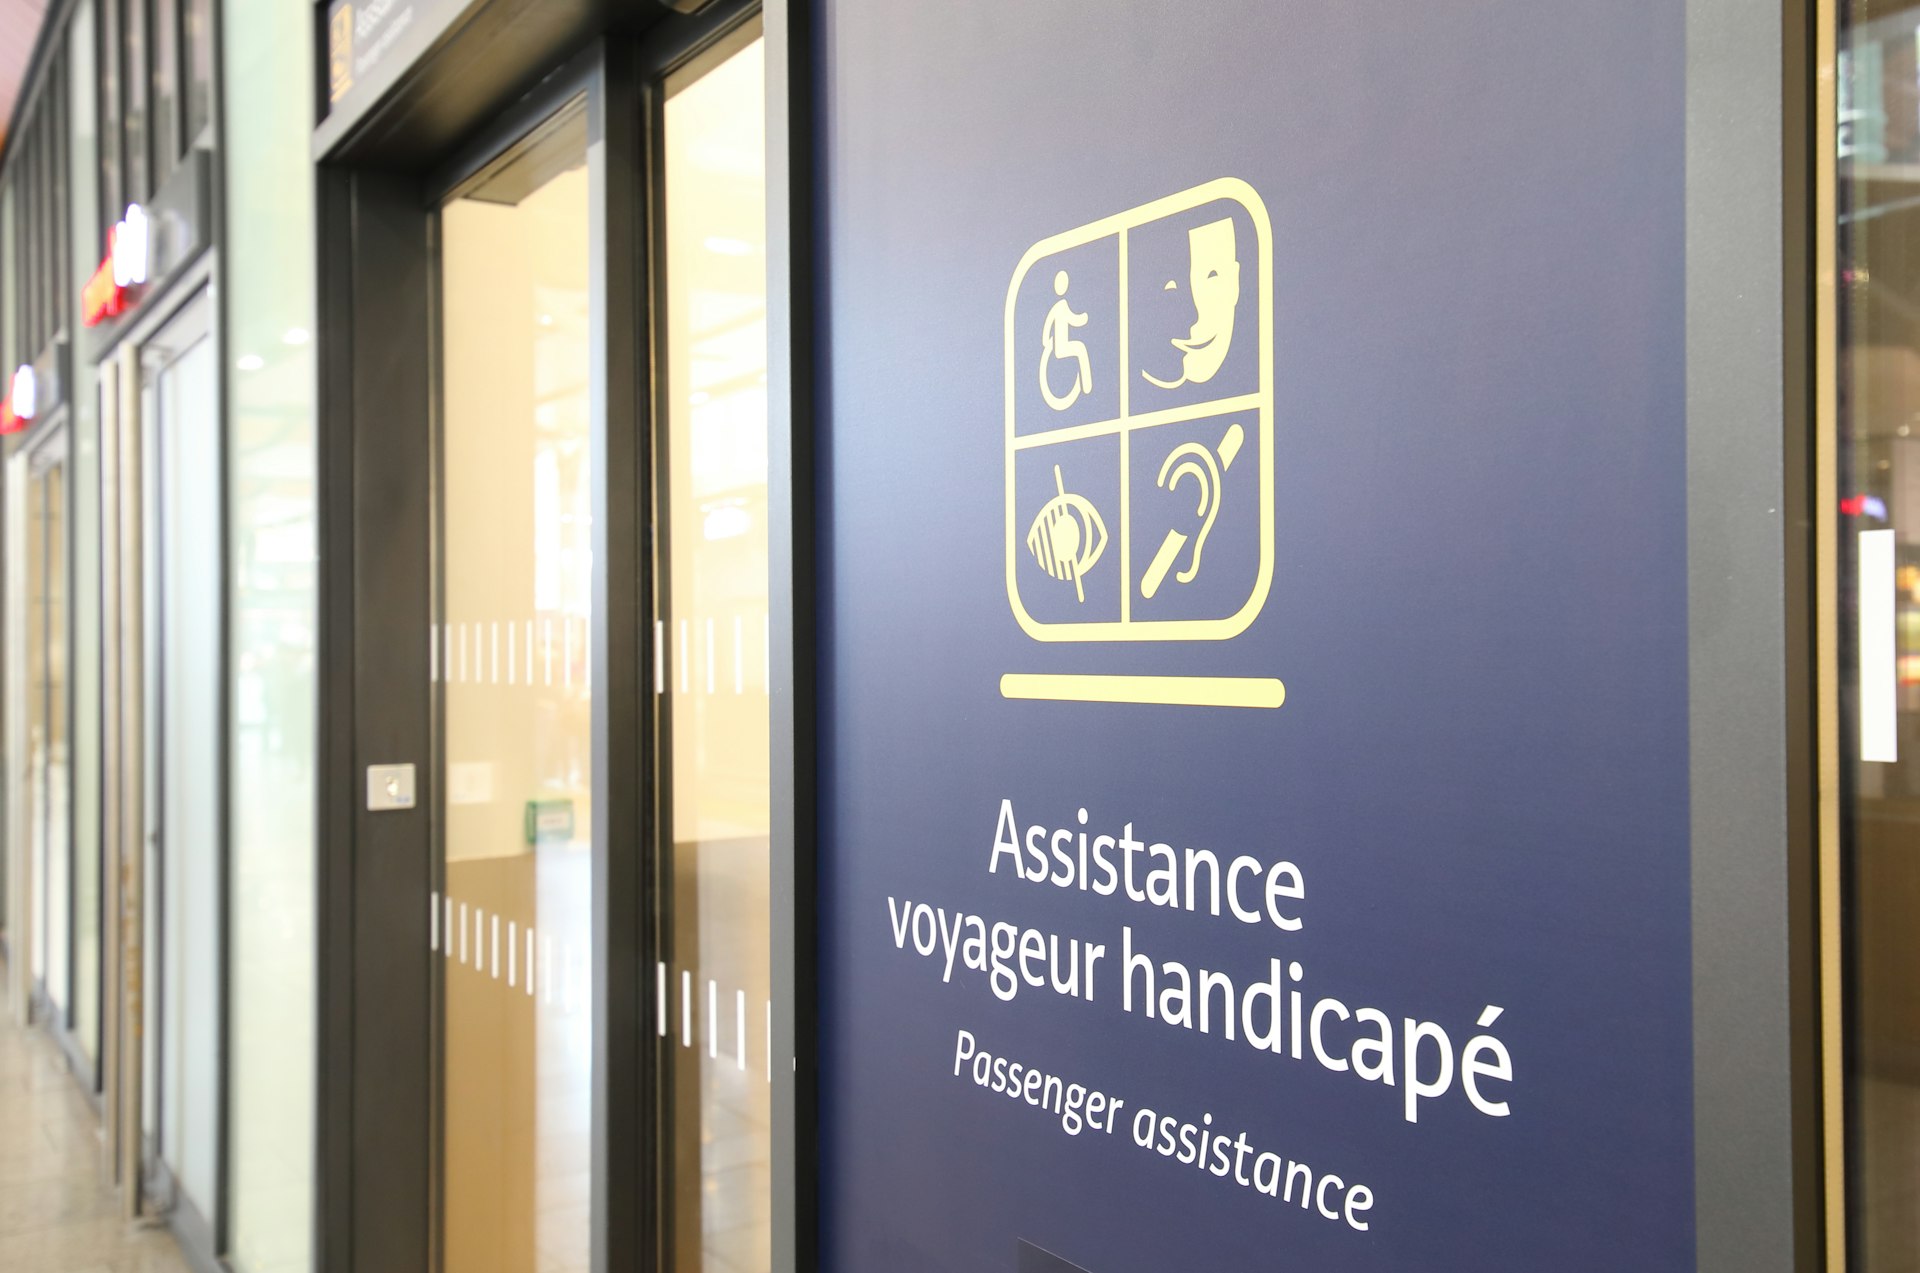 A sign reading "Assistance voyageur handicapé (Passenger assistance)" on the door of an office at a train station in Paris, France